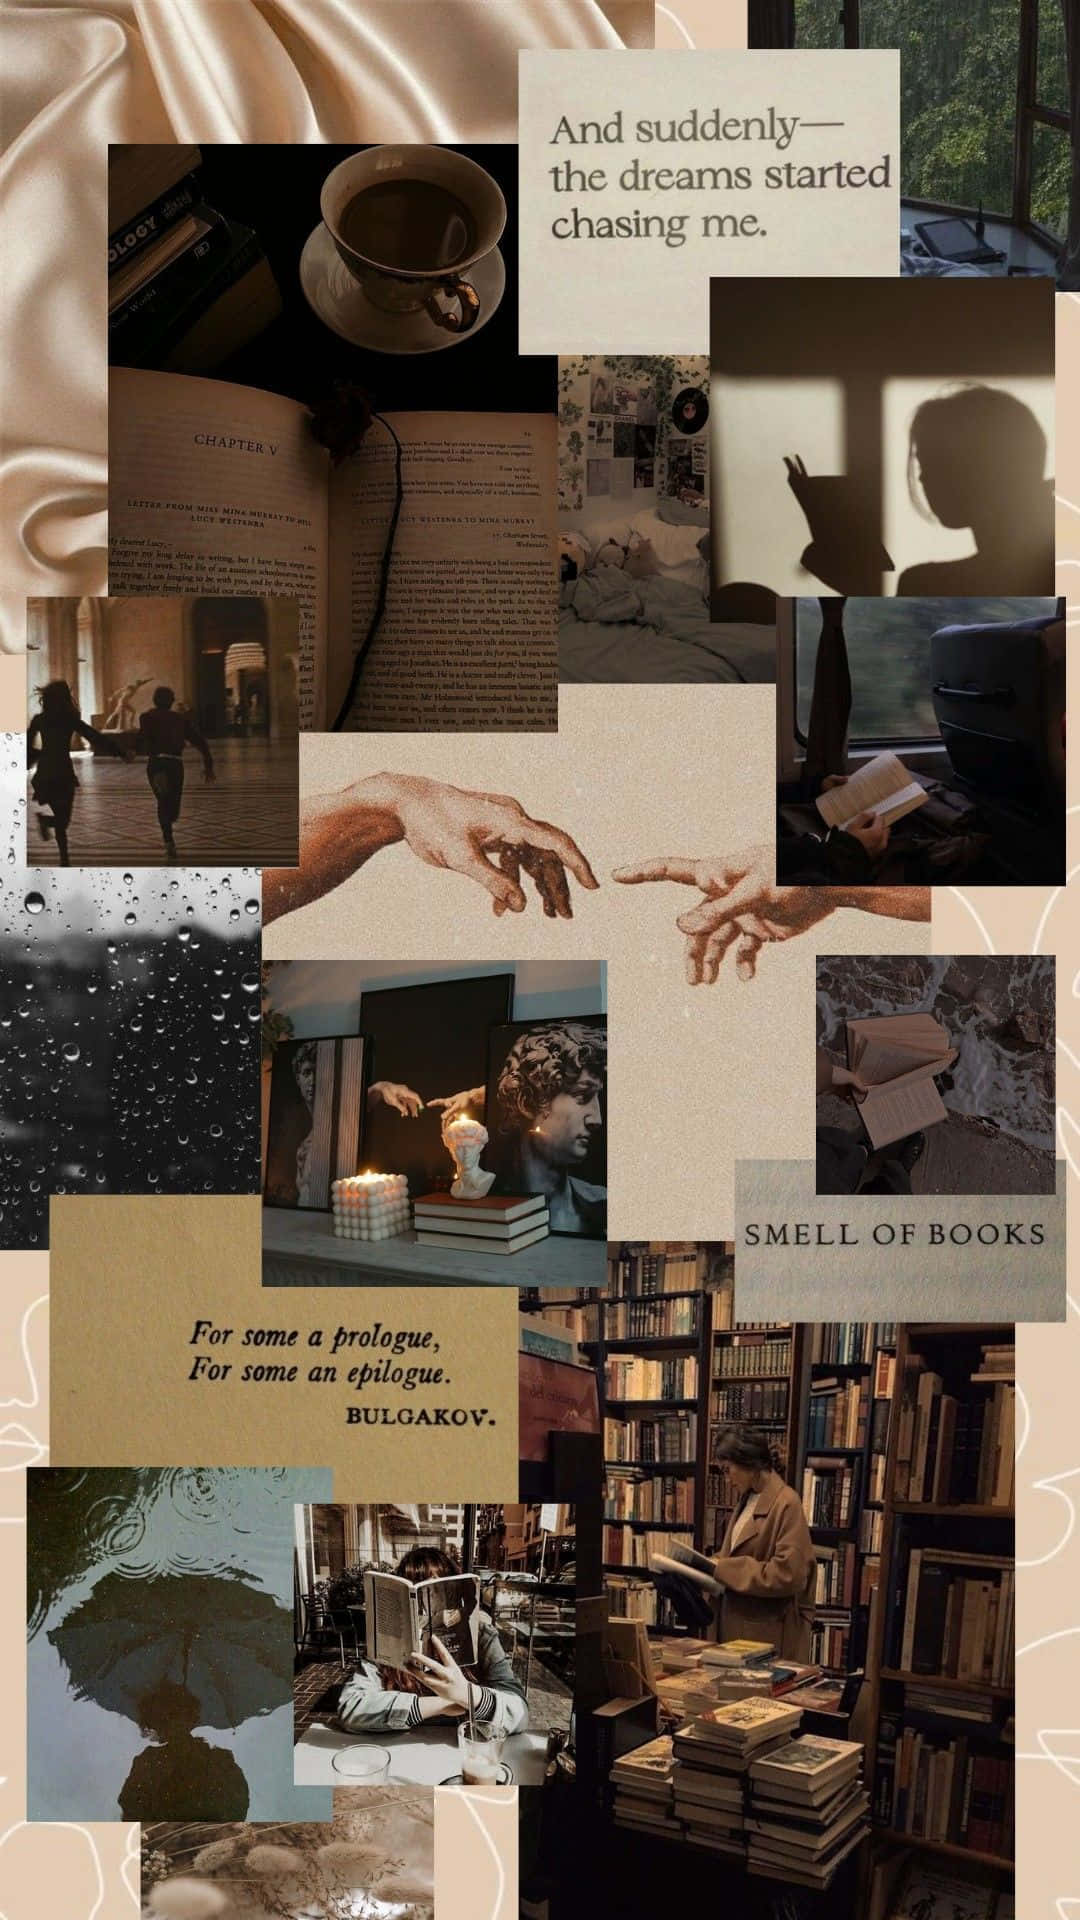 Download A Collage Of Pictures Of Books And People | Wallpapers.com